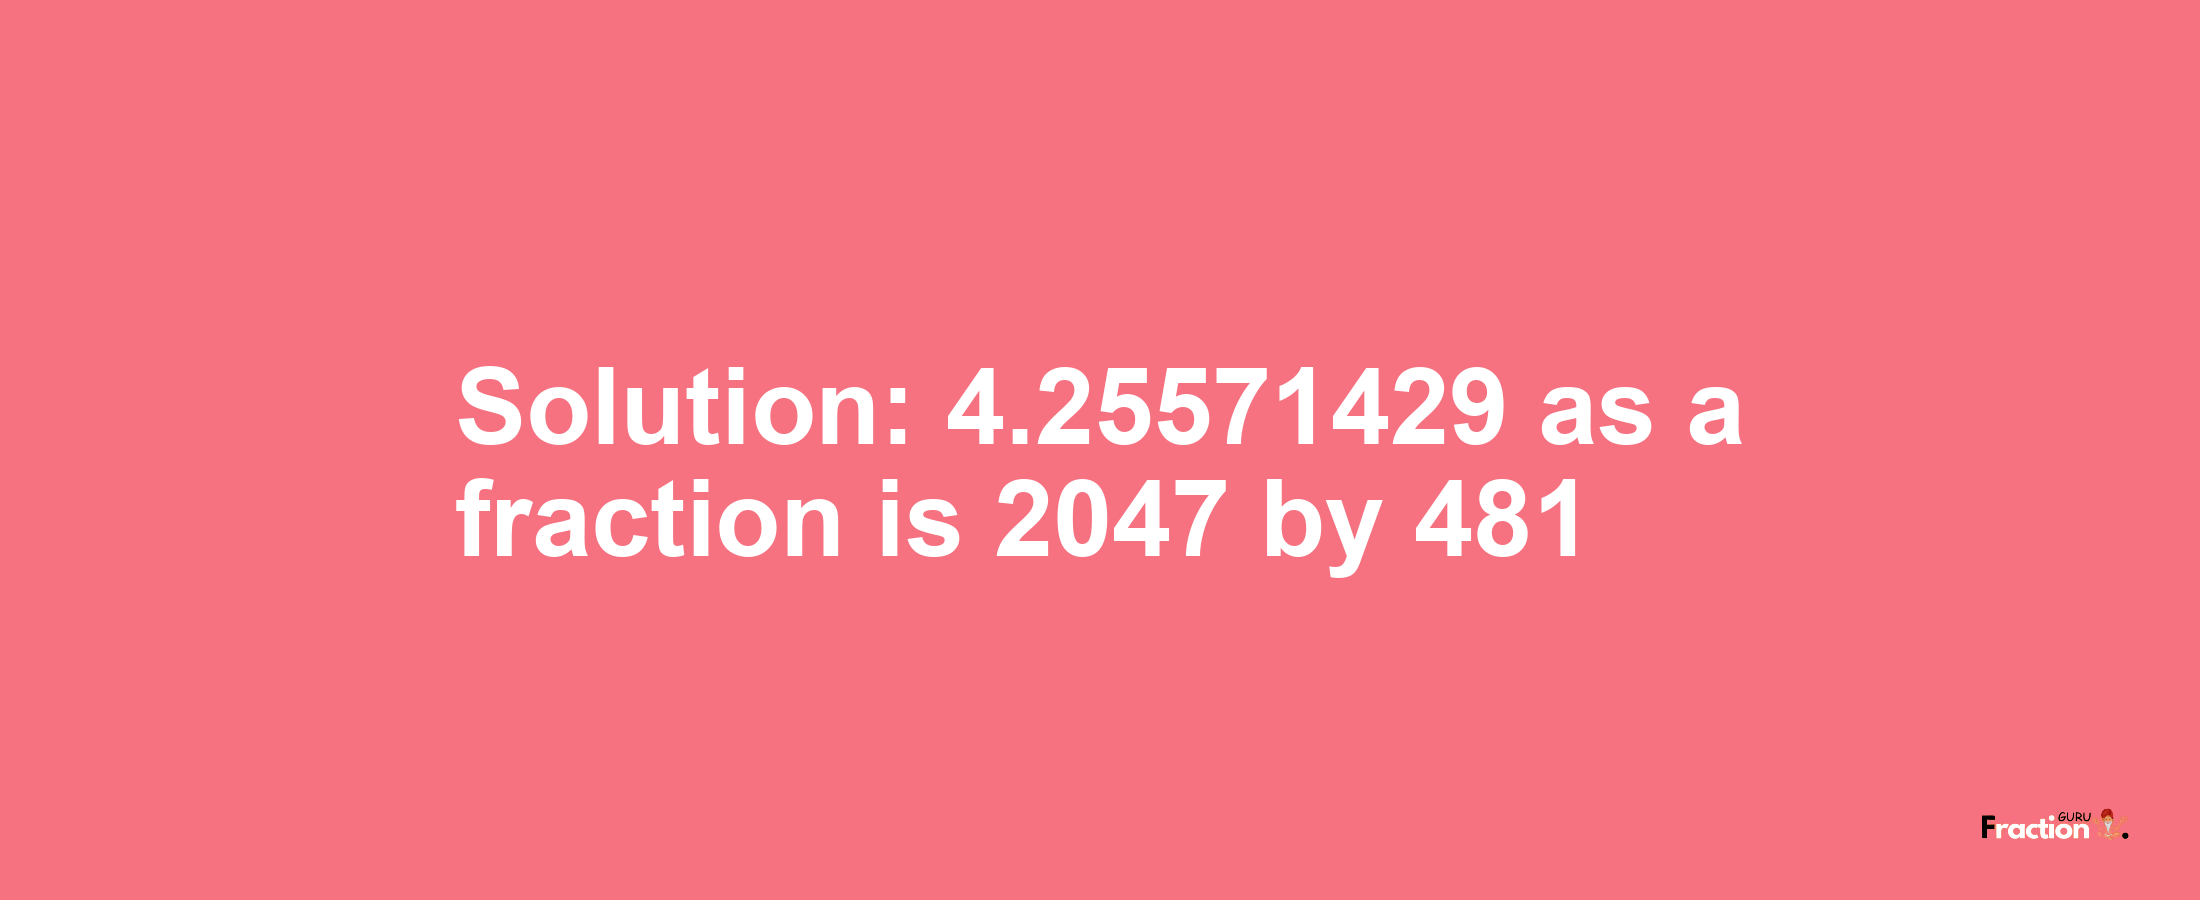 Solution:4.25571429 as a fraction is 2047/481